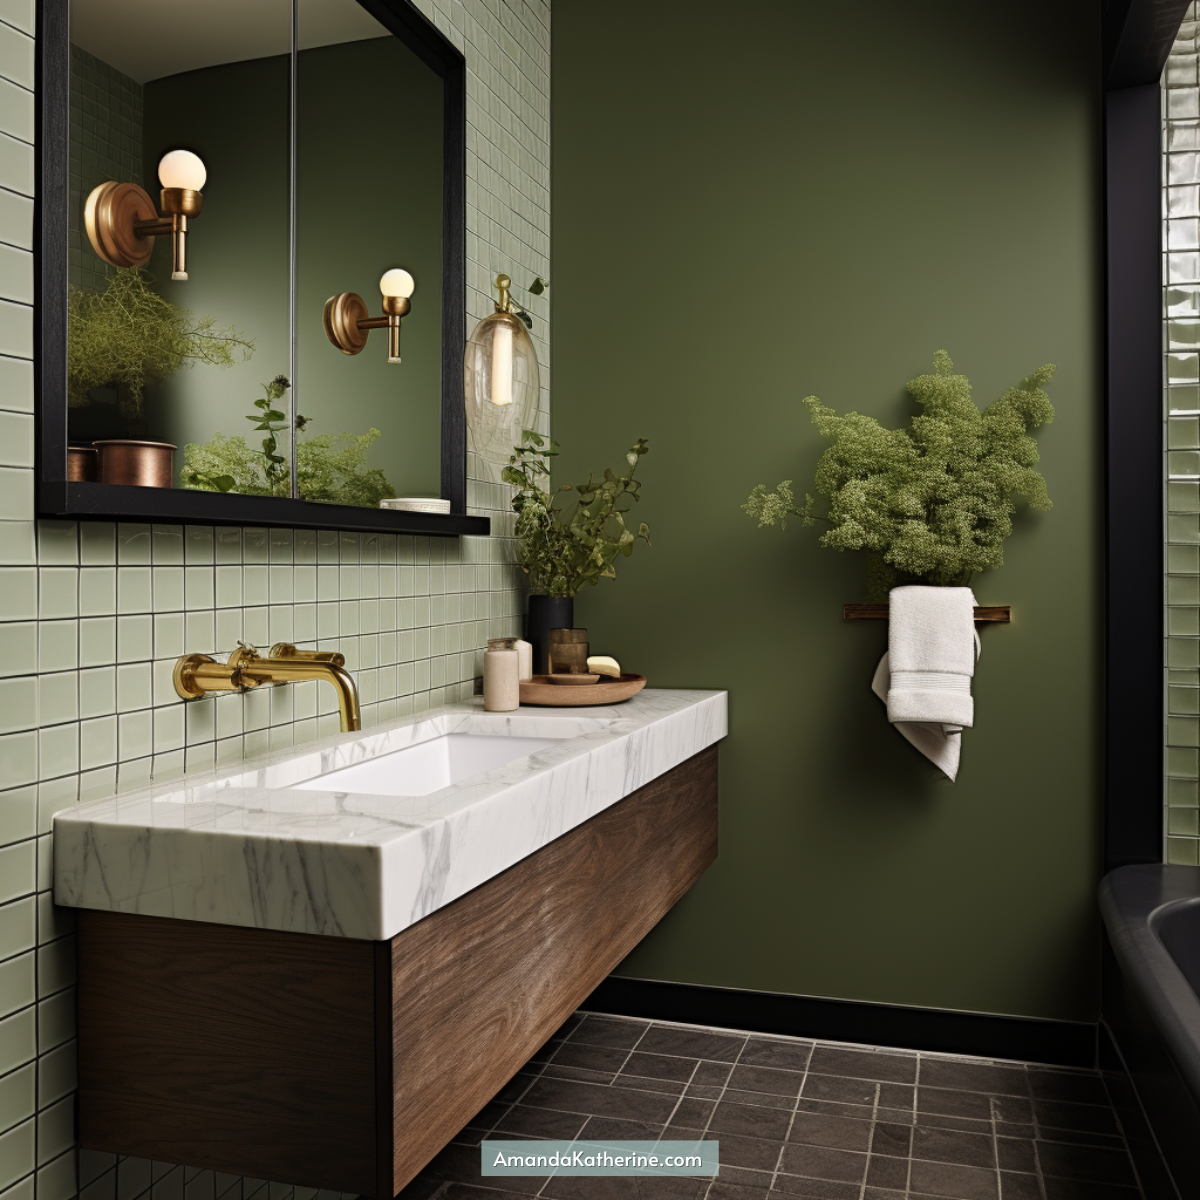 light olive green color scheme and wood